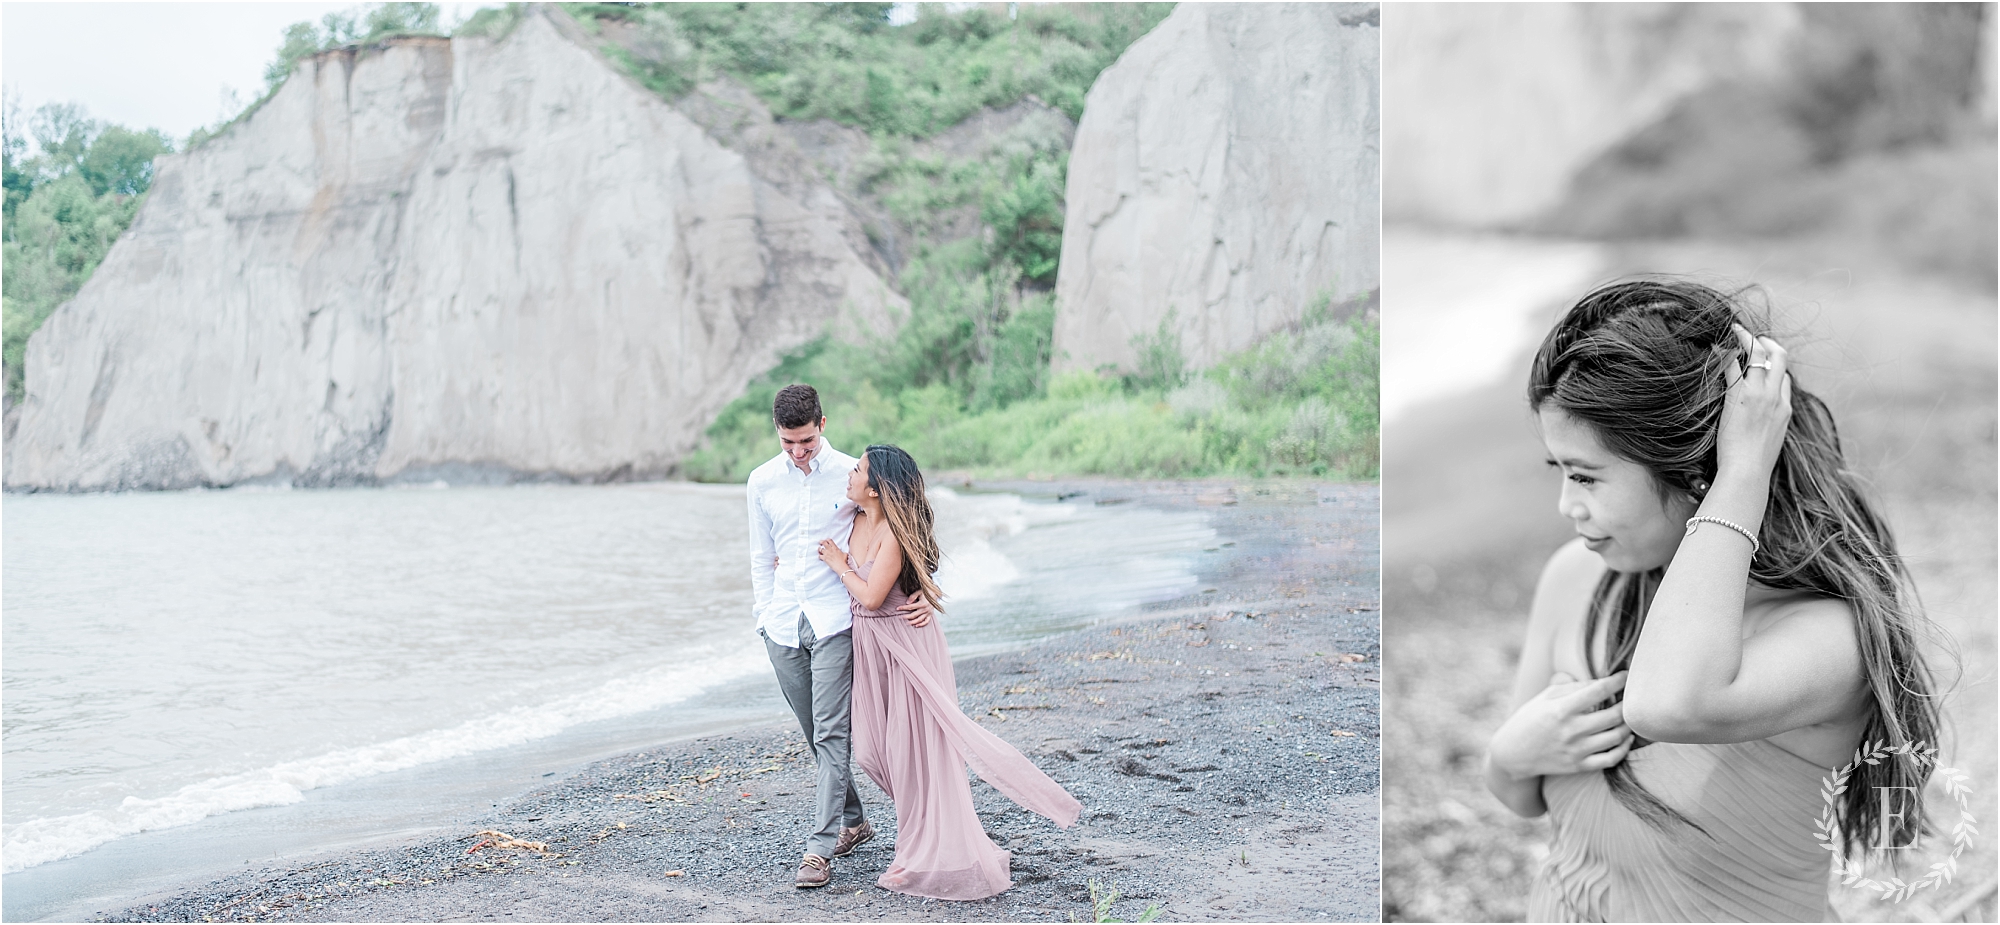 0088 Jehd and Elvi Engagement at the Scarborough Bluffs Toronto - Photography by Emma_WEB.jpg